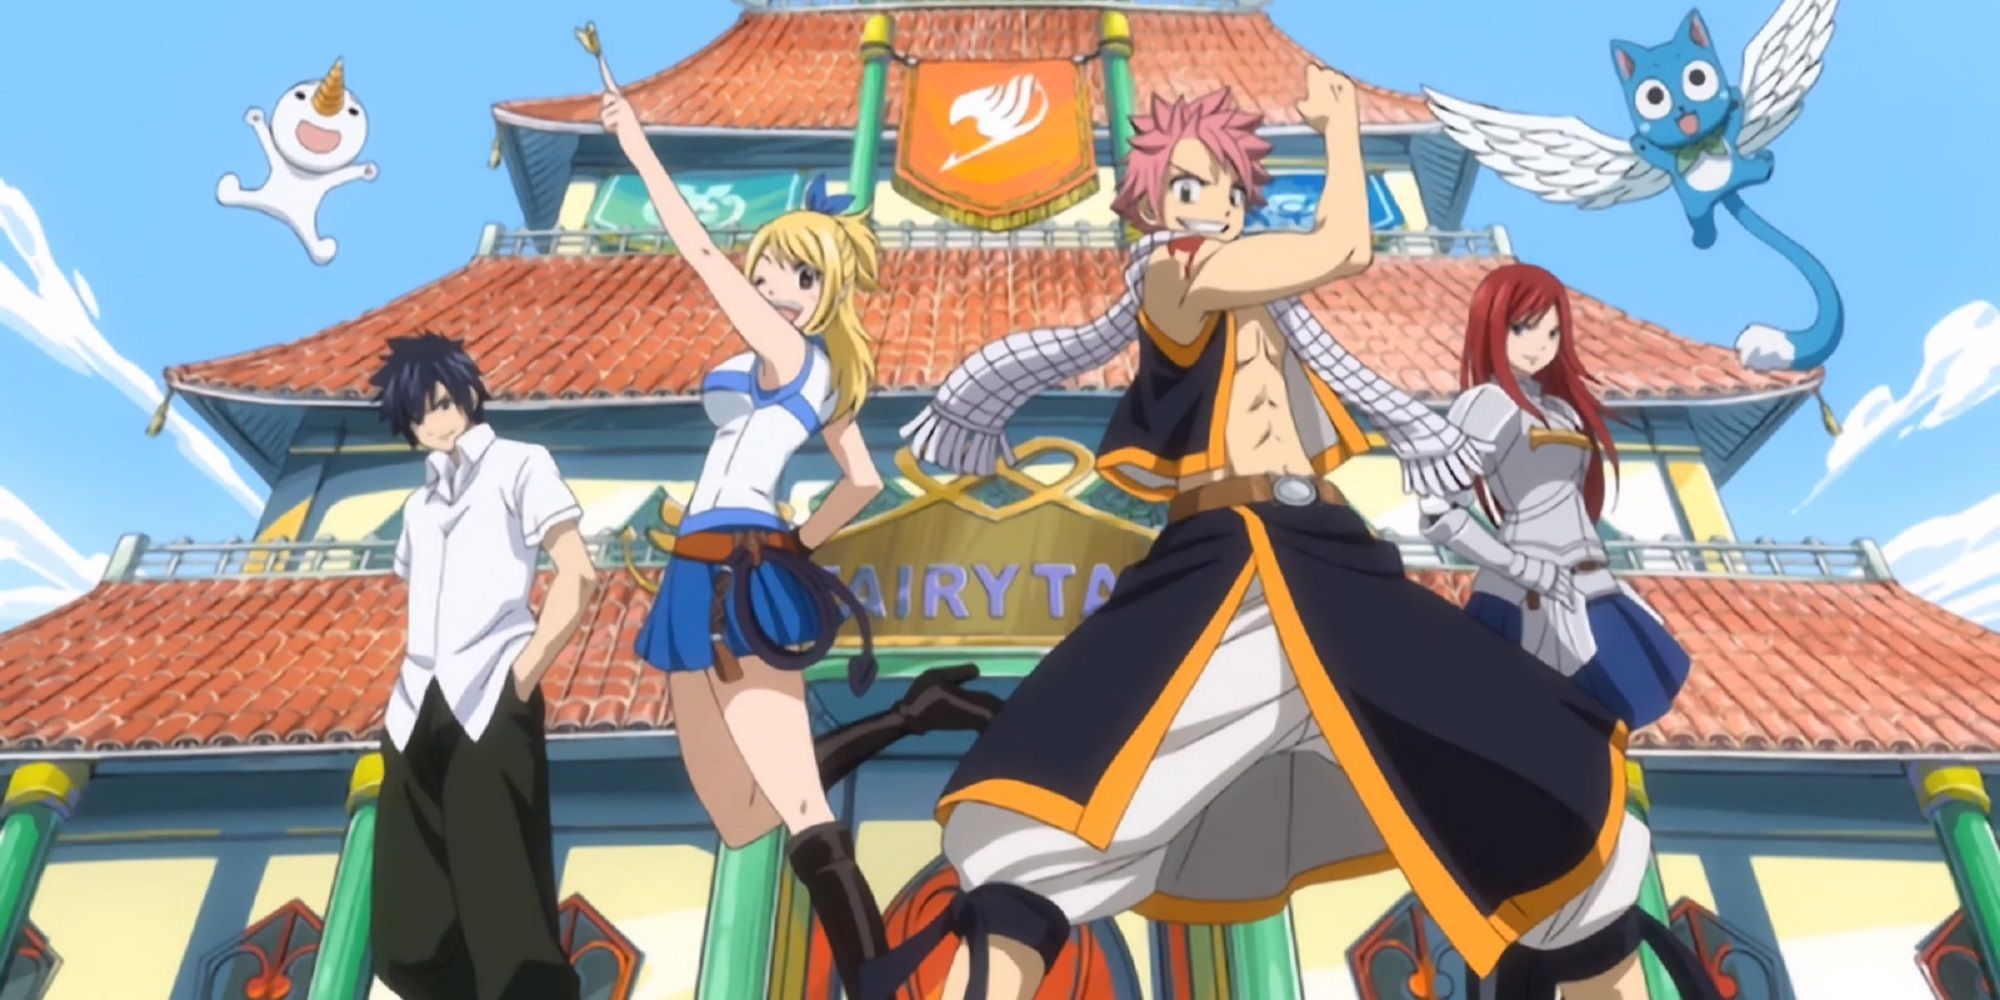 Team Natsu posing in front of the Fairy Tail building in the very first Fairy Tail opening